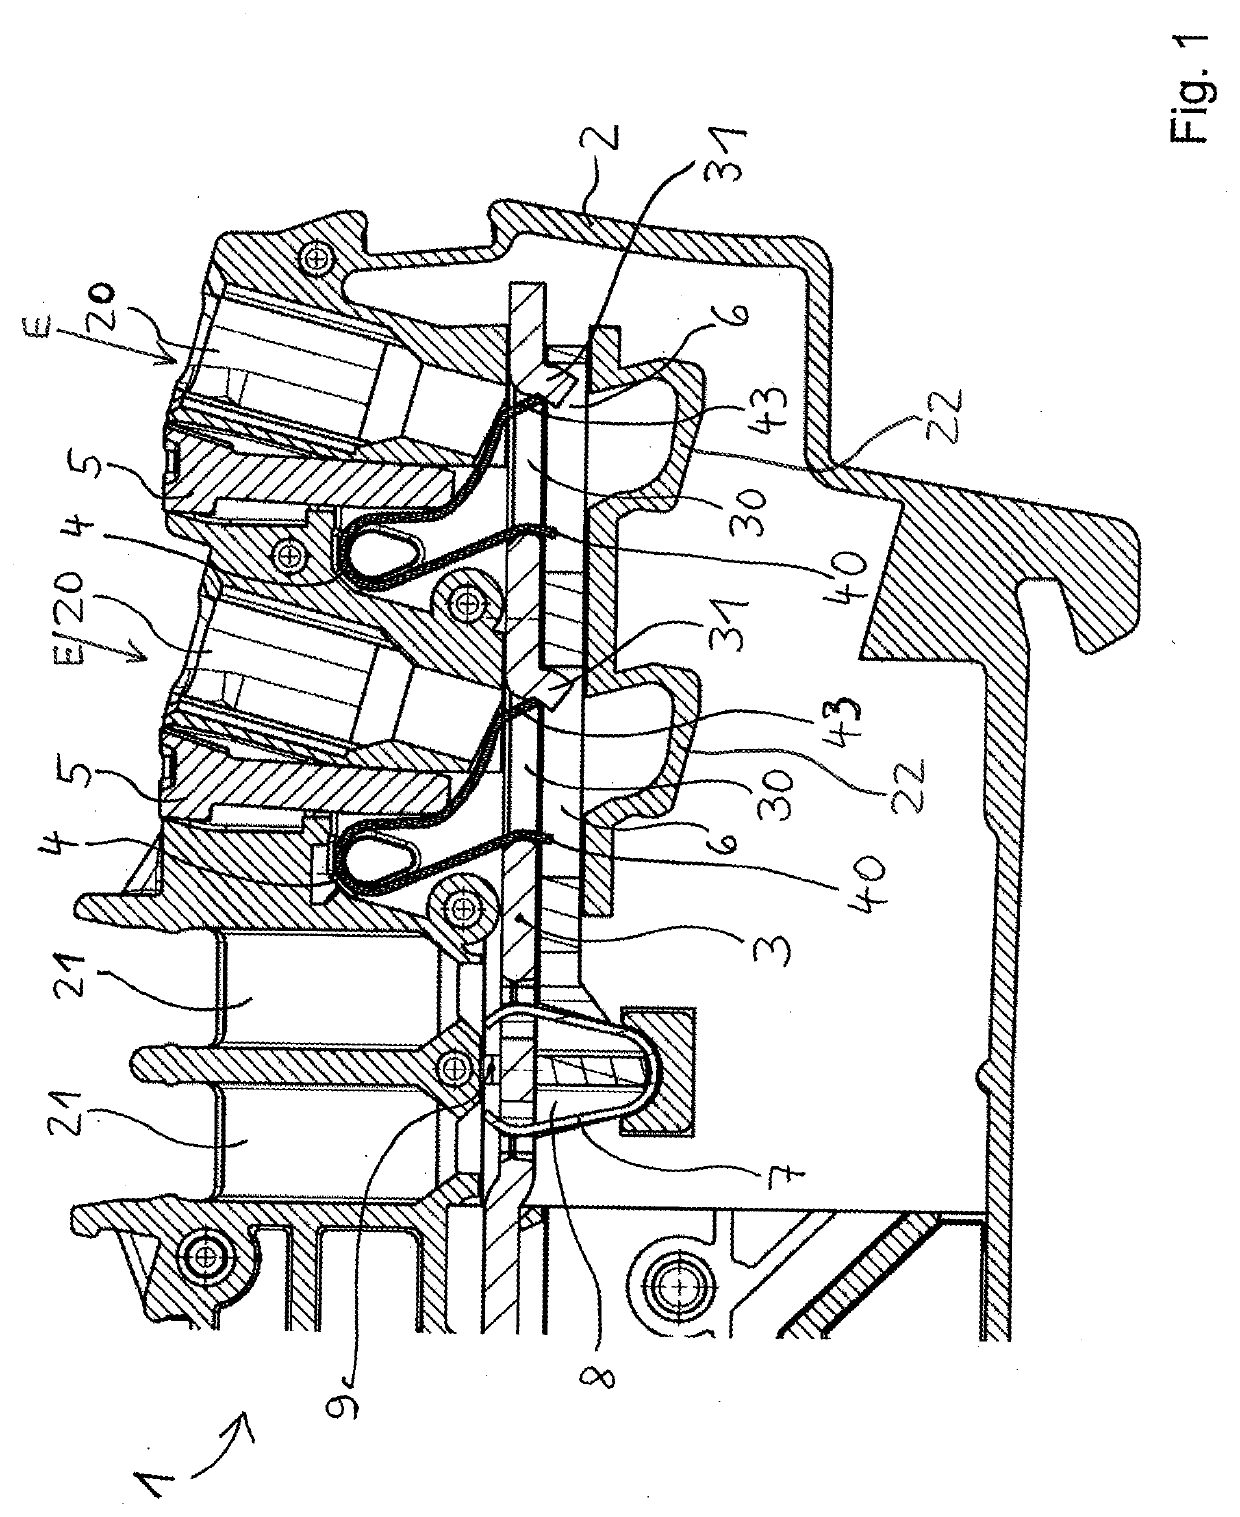 Contact insert for a conductor terminal and conductor terminal